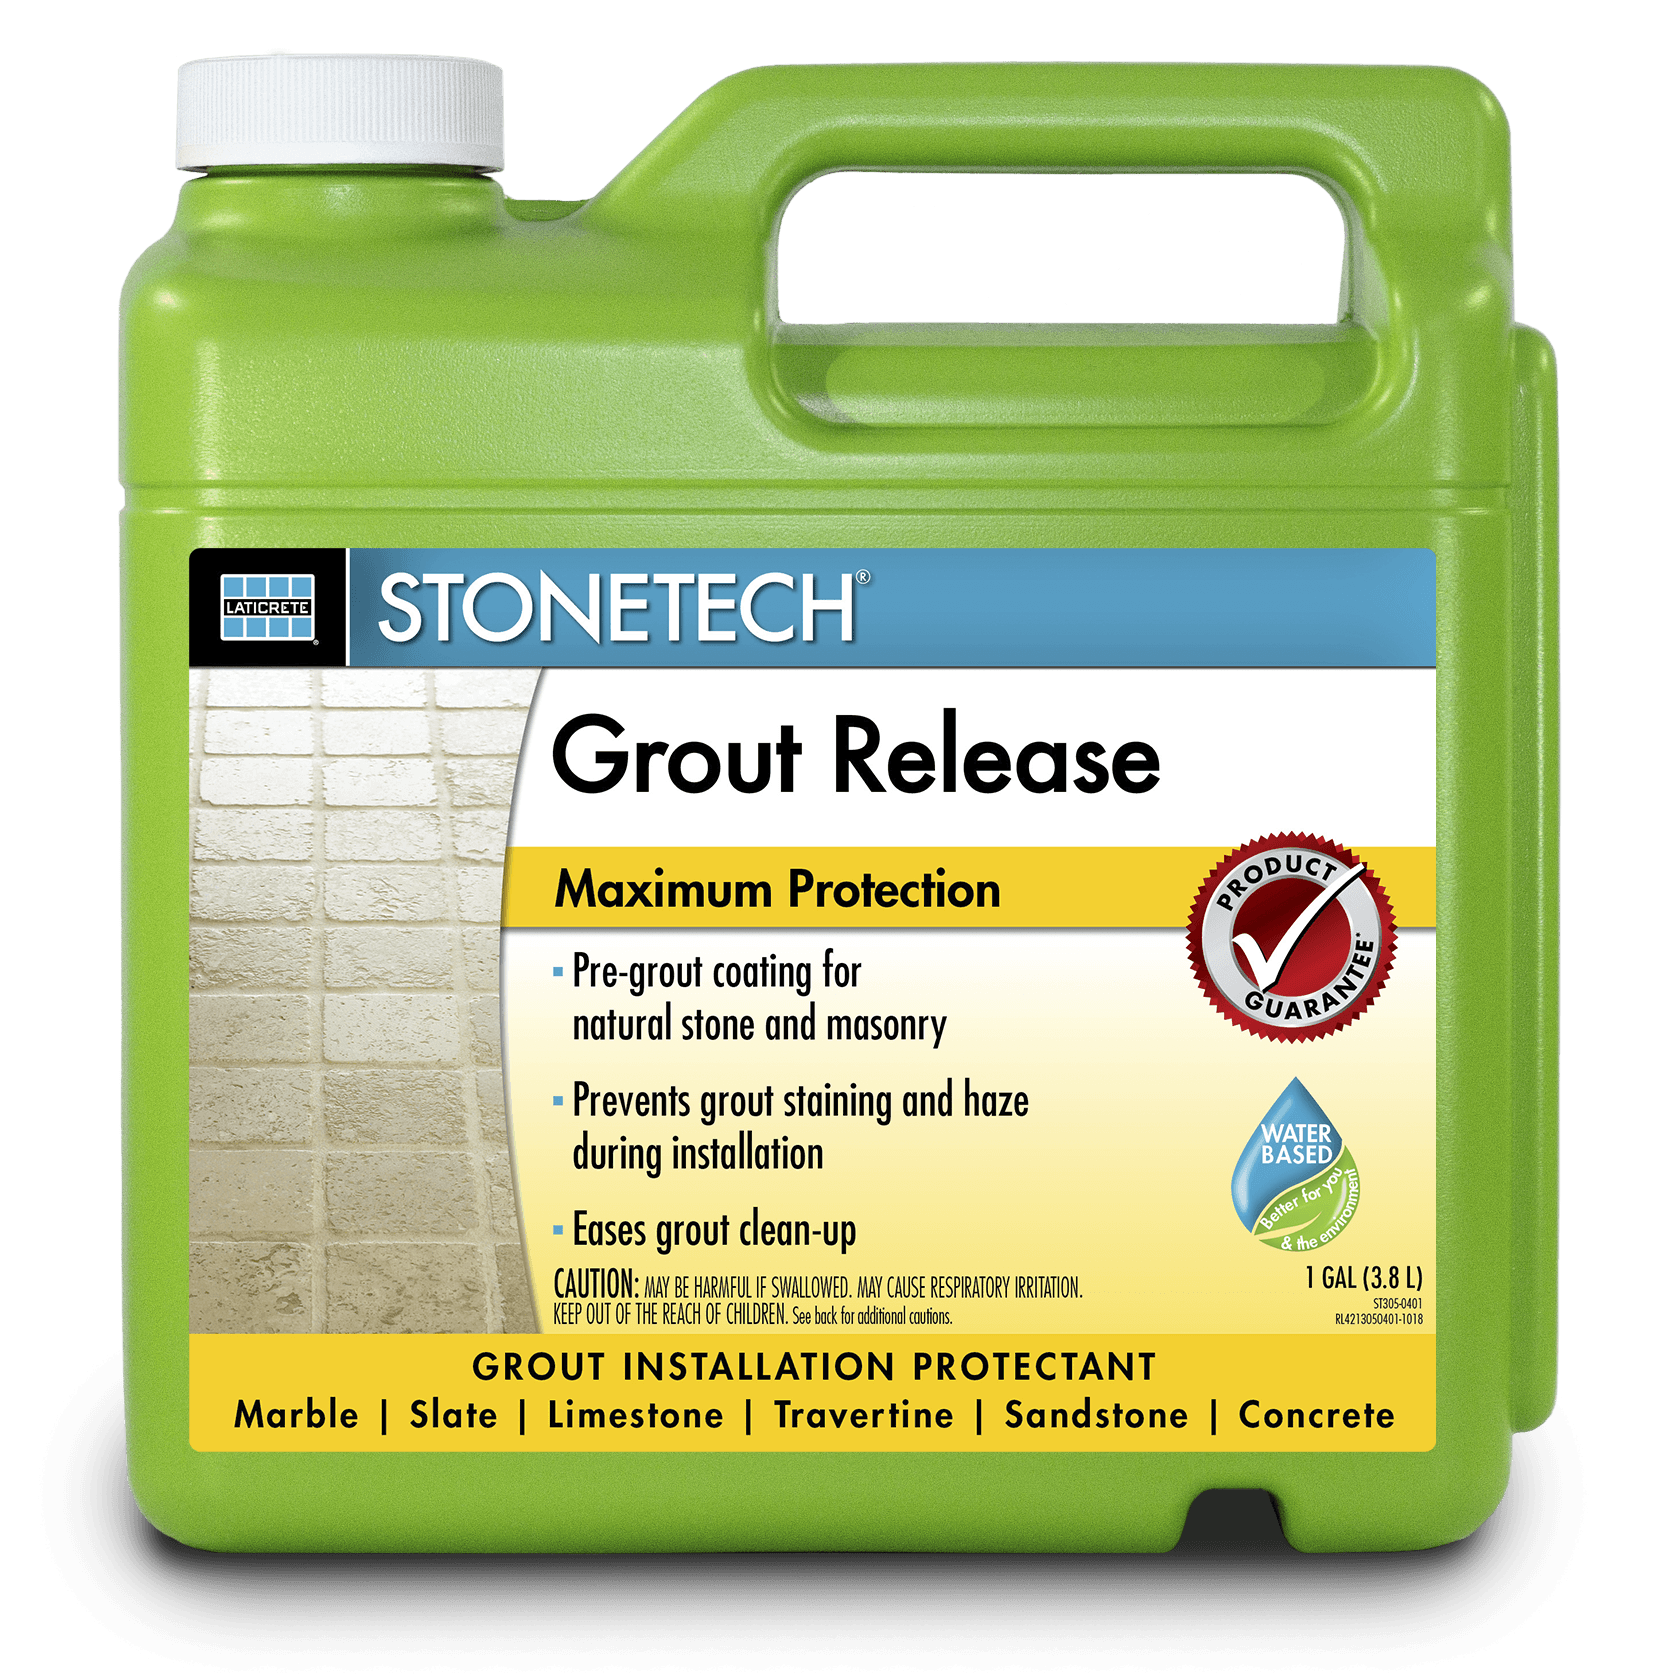 StoneTech Grout Release